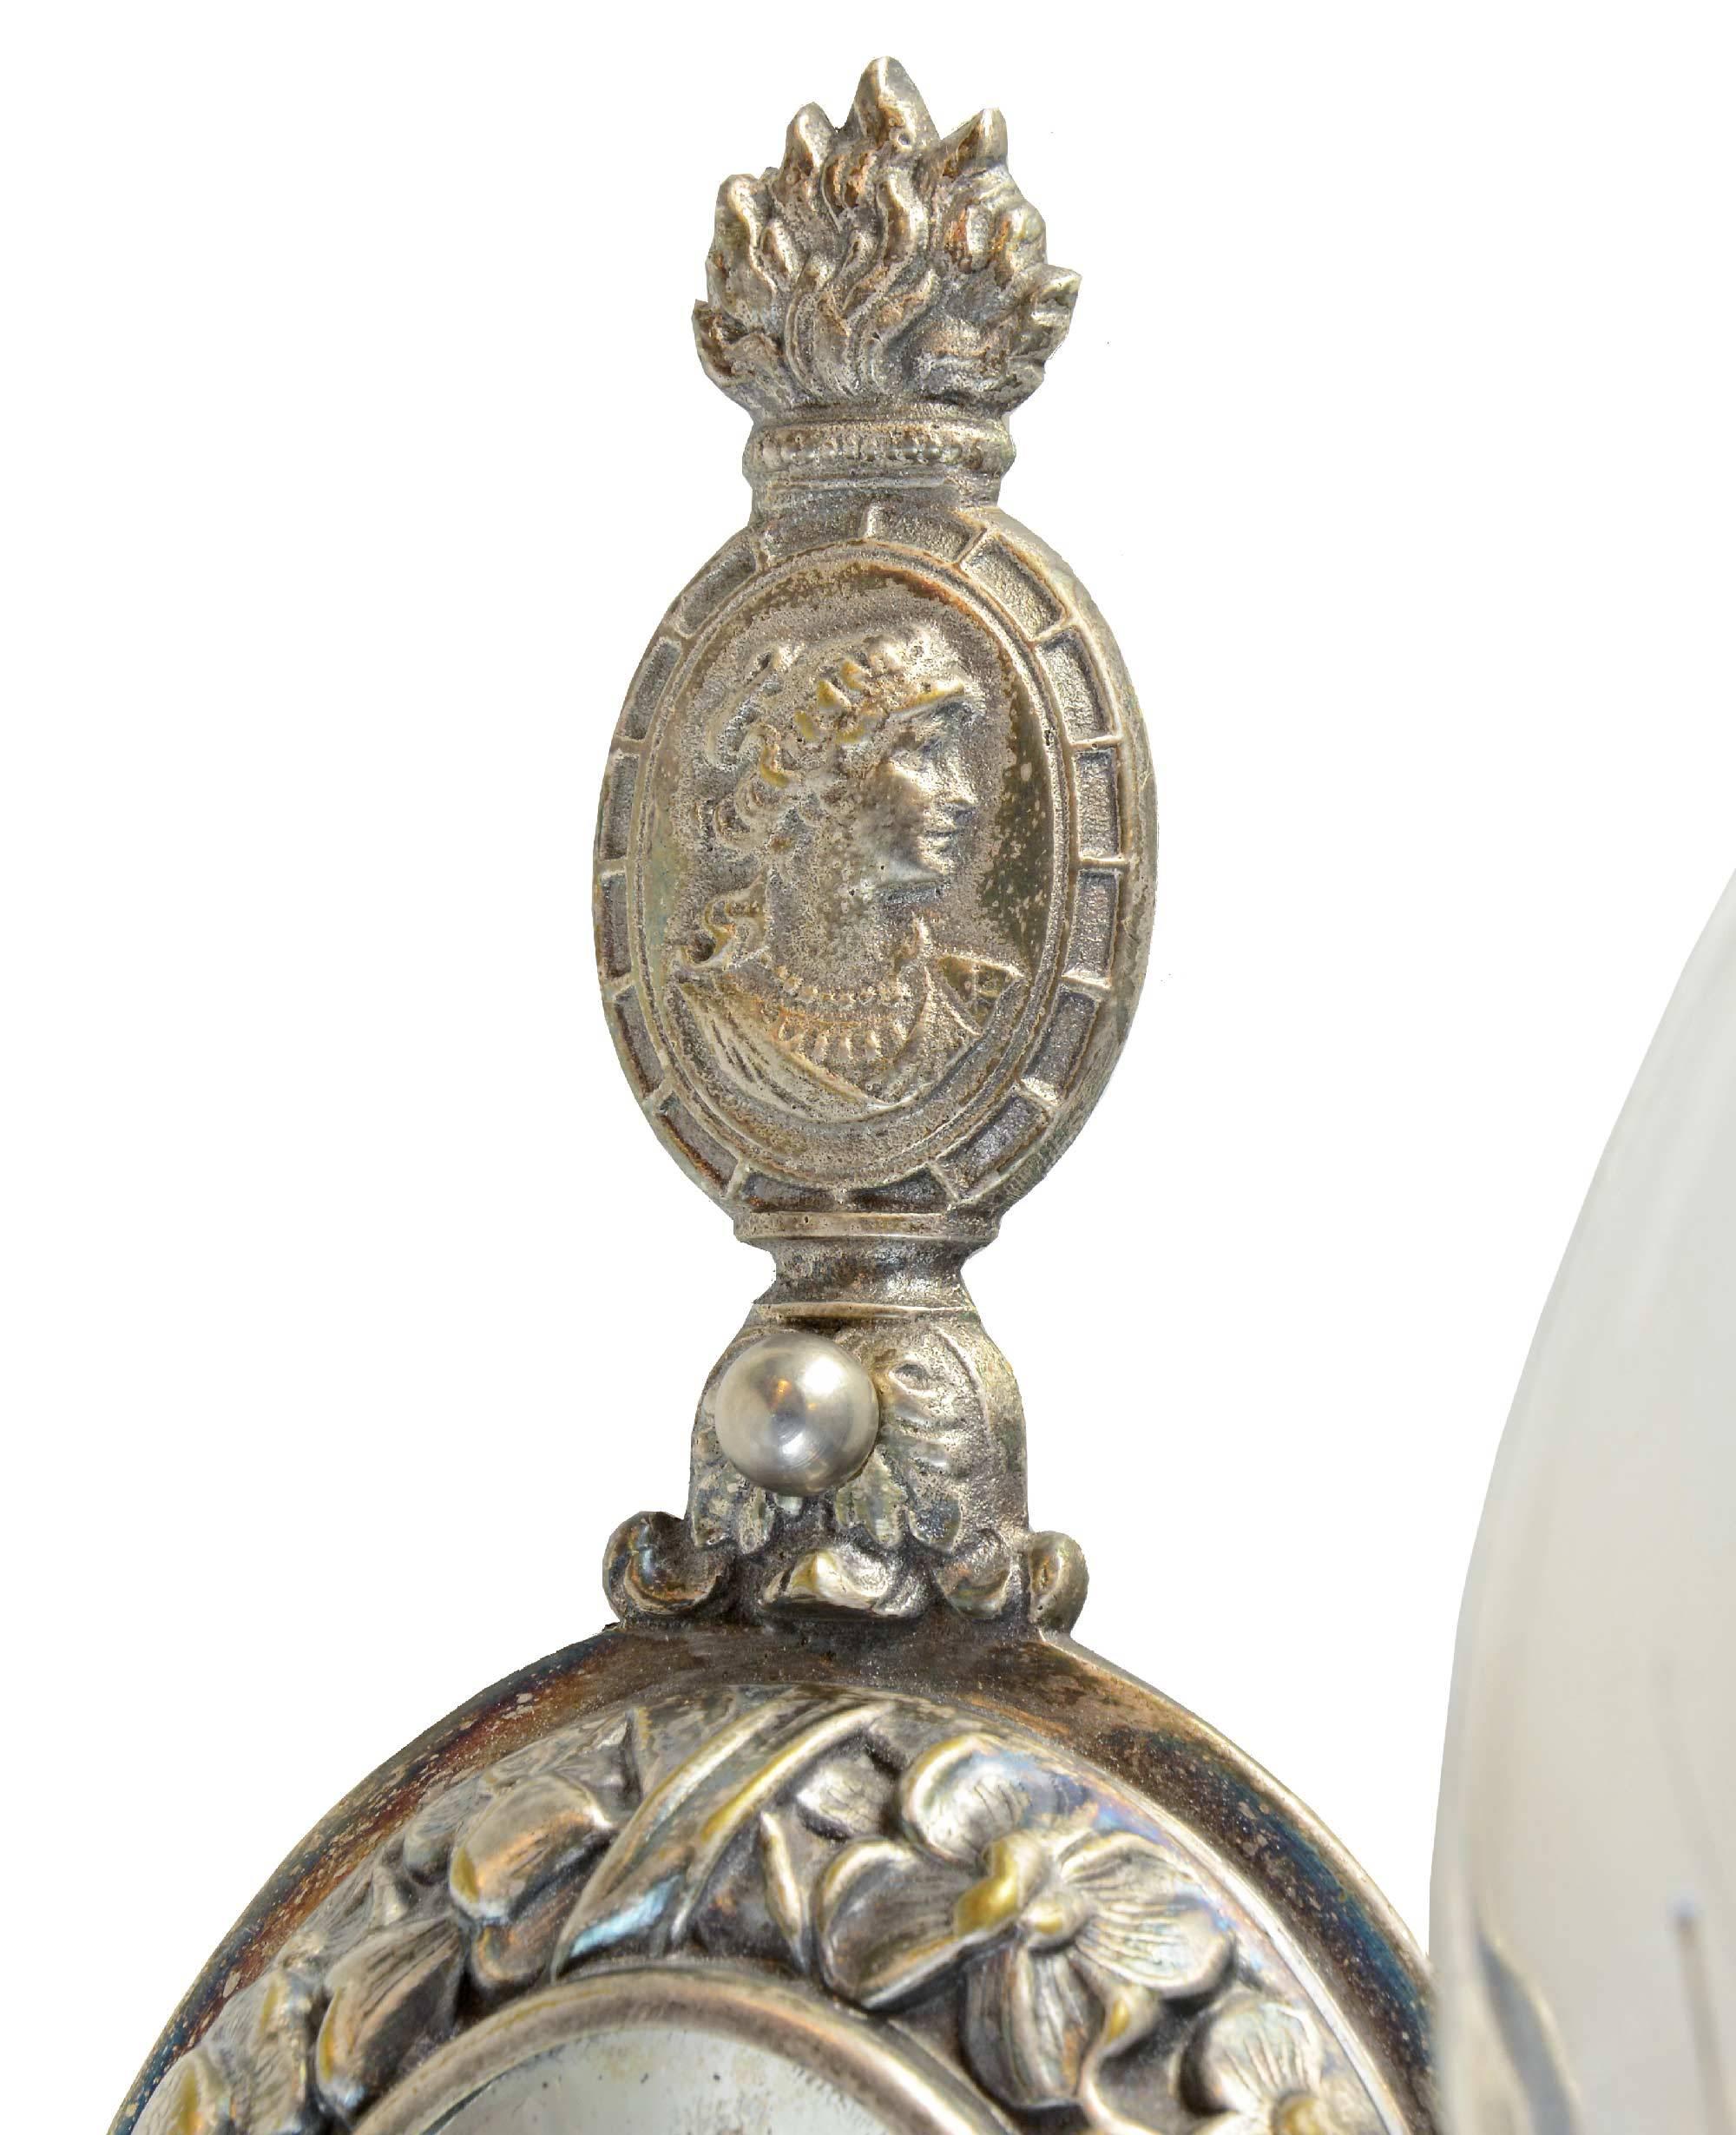 These decorative silver over cast brass sconces, manufactured by Moran & Hastings of Chicago, IL, feature a decorative floral border around a beveled mirror on the backplate, with the same leafy pattern around the bobeche, as well as a cameo of a